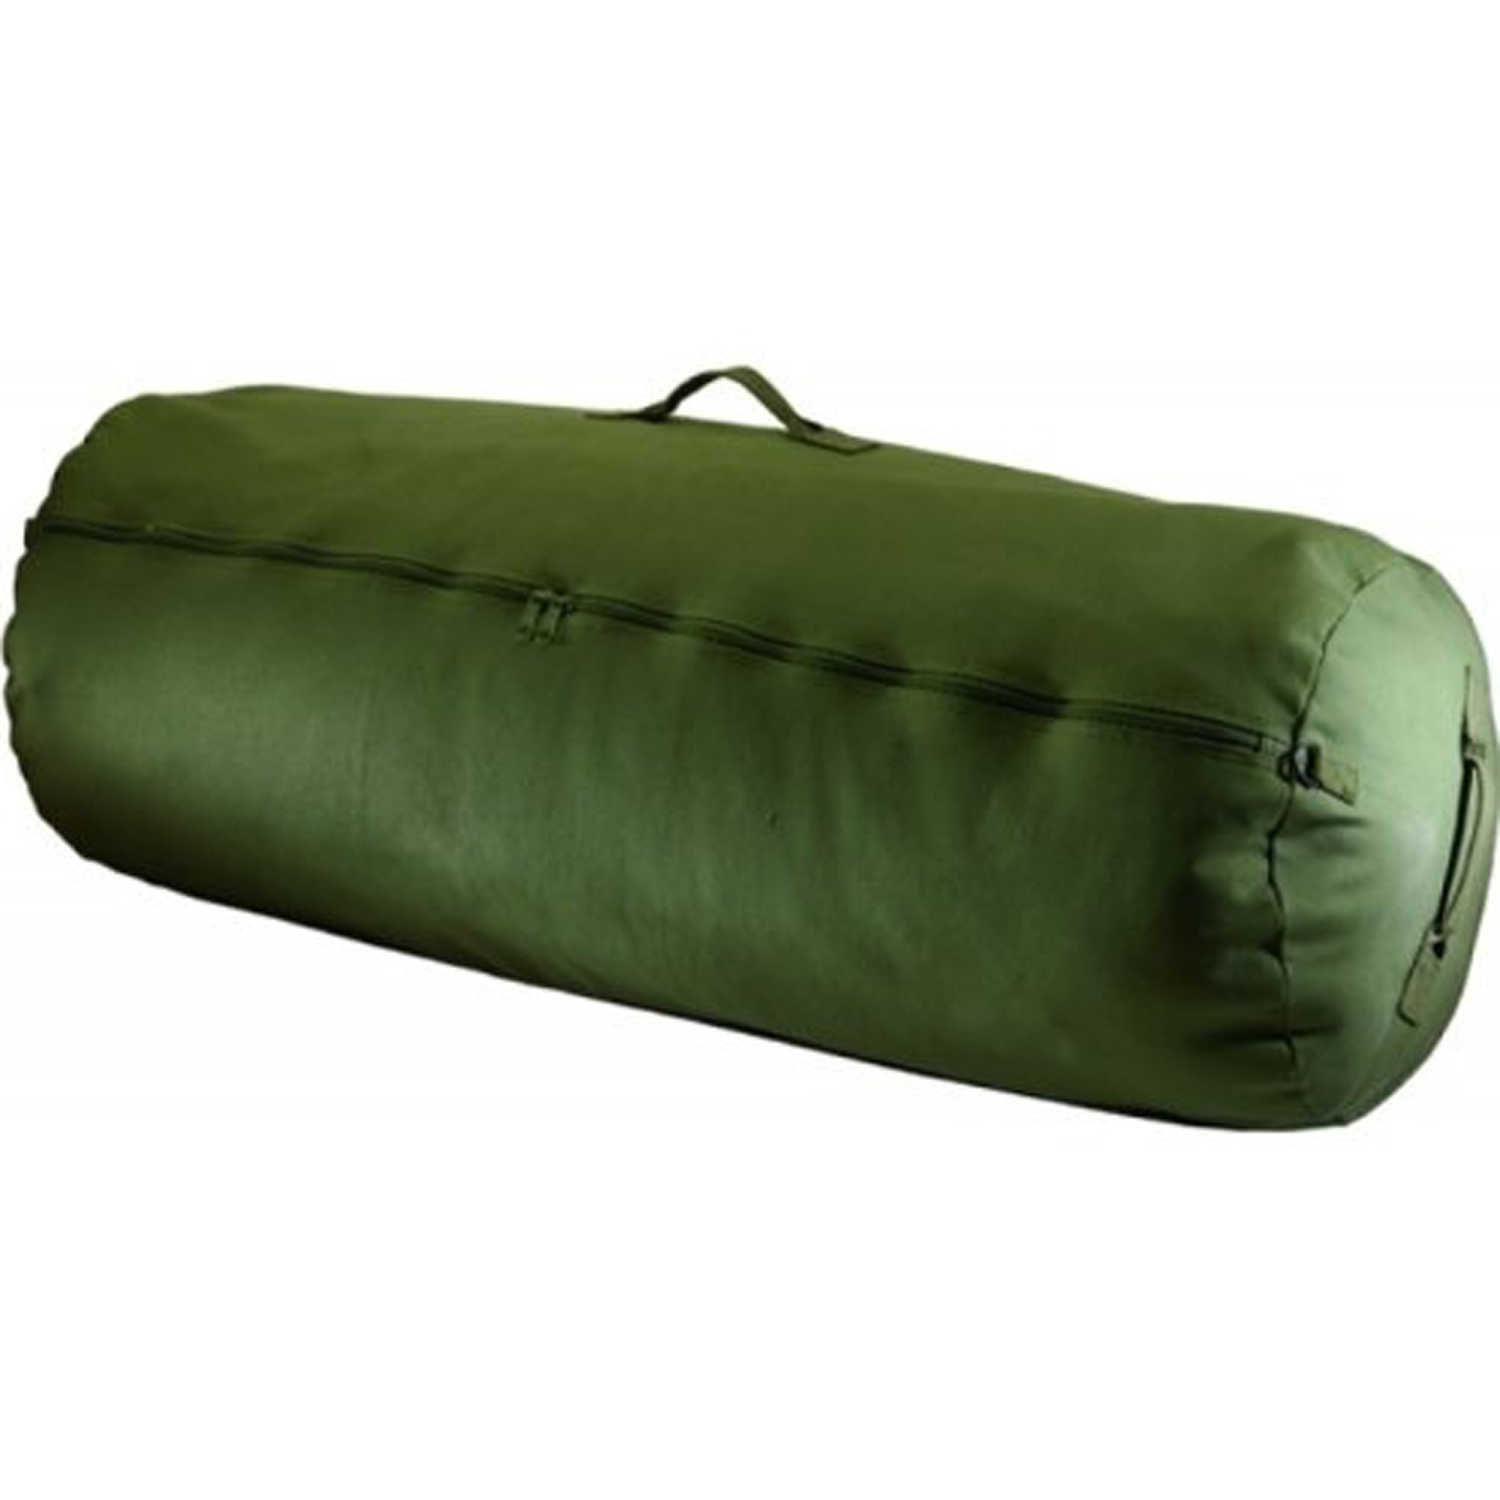 Texsport 10431 Duffel Bag 50 X 30 Inches for sale online 